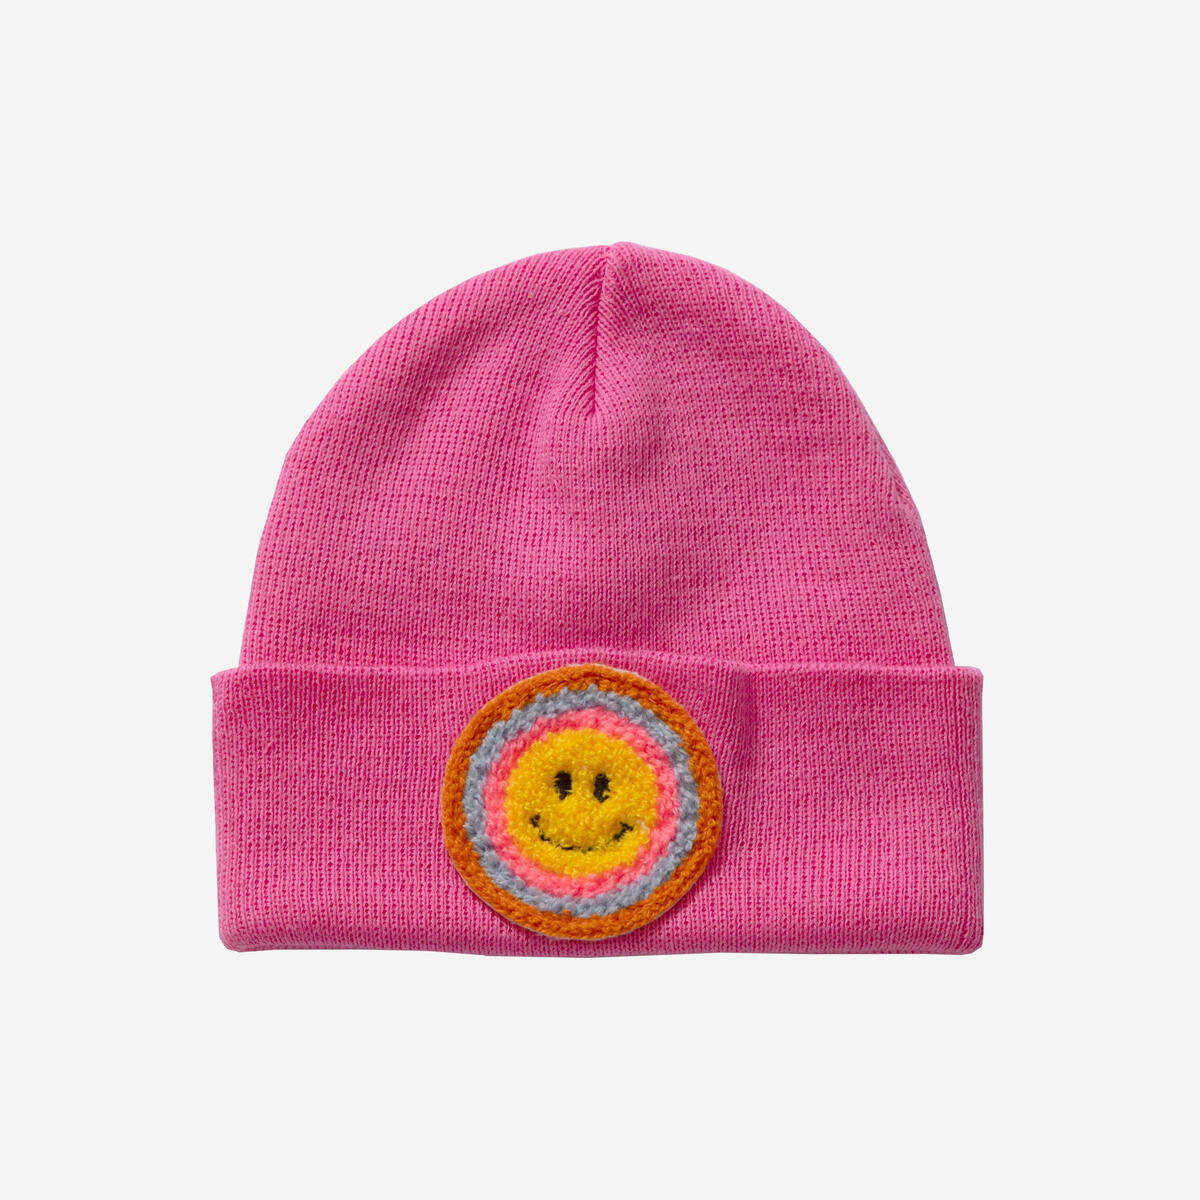 HOT PINK MULTI SMILEY BEANIE